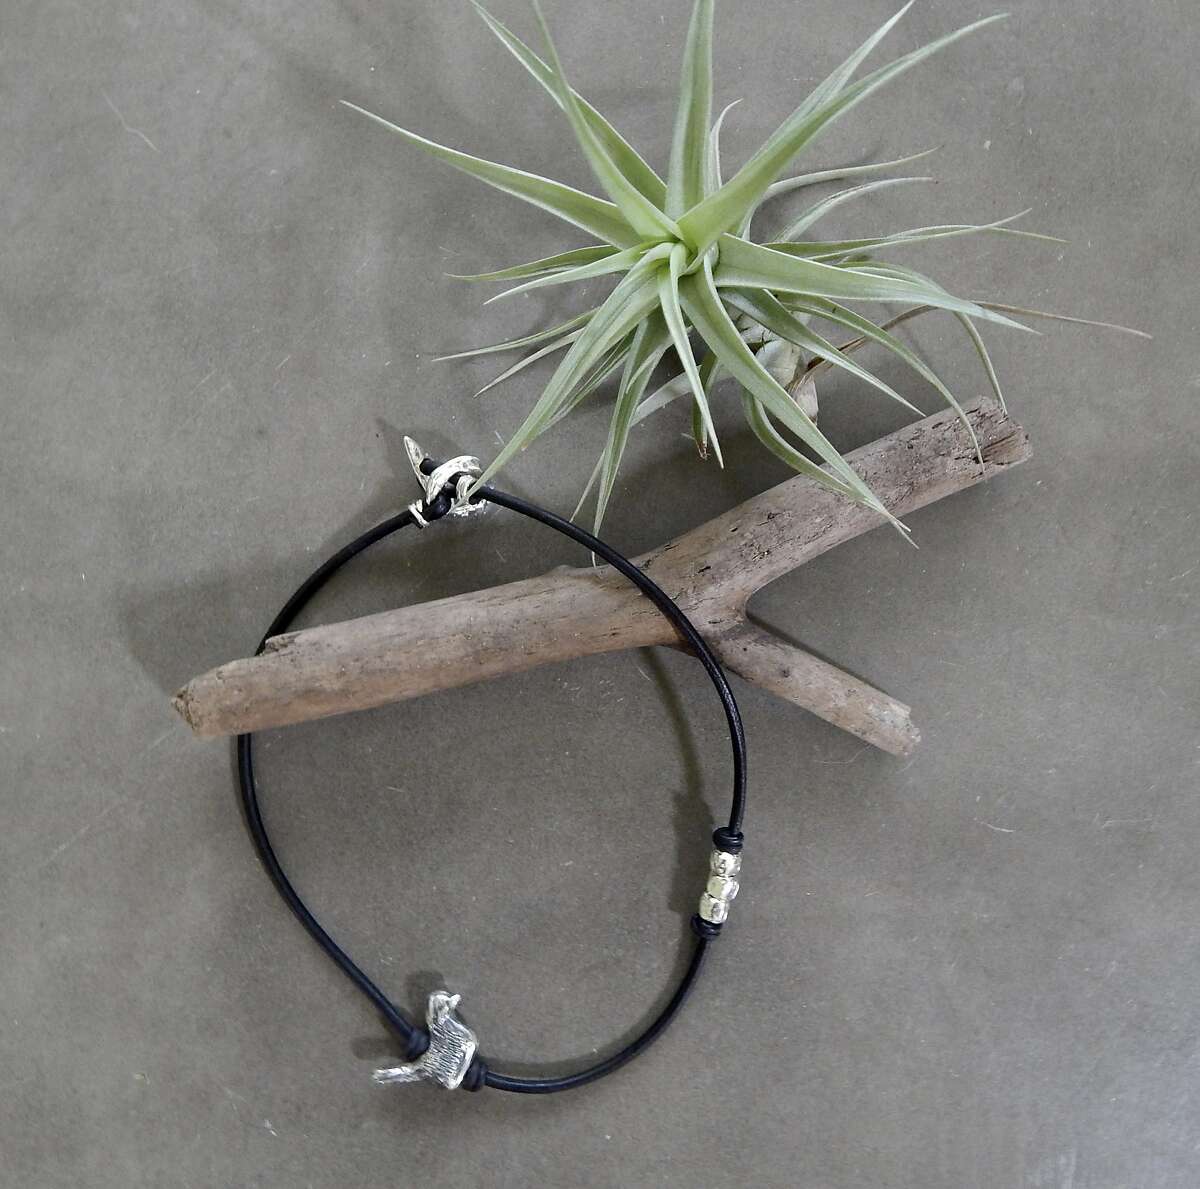 San Francisco ceramist Lisa Neimeth and jewelry designer Lauren Roskoff collaborates to create a new collection of necklaces, rings and bracelets inspired by objects Neimeth found in New Mexico.